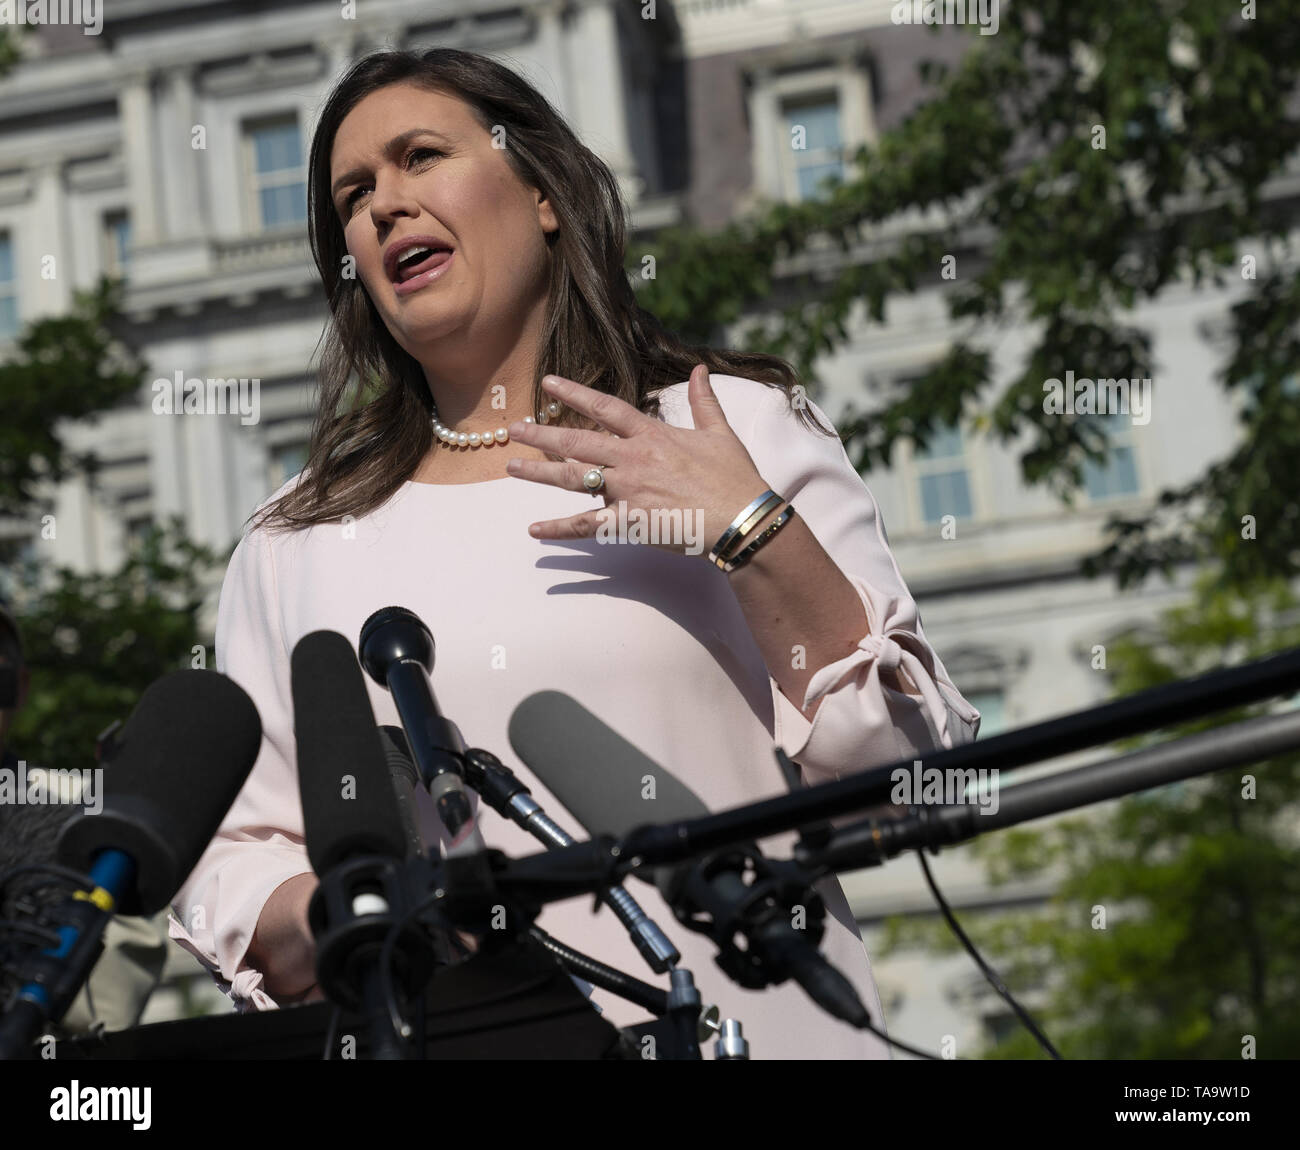 May 23, 2019, Washington, District of Columbia, U.S.:- White House Press Secretary SARAH HUCKABEE SANDERS speaks to the media at the White House in Washington, DC. Sanders addressed President Trump's comments following his meeting with Senate Minority Leader Chuck Schumer (D-NY) and House Speaker Nancy Pelosi (D-CA), who accused Trump of engaging in a cover-up beforehand. Credit: Chris Kleponis/CNP/ZUMA Wire/Alamy Live News Stock Photo